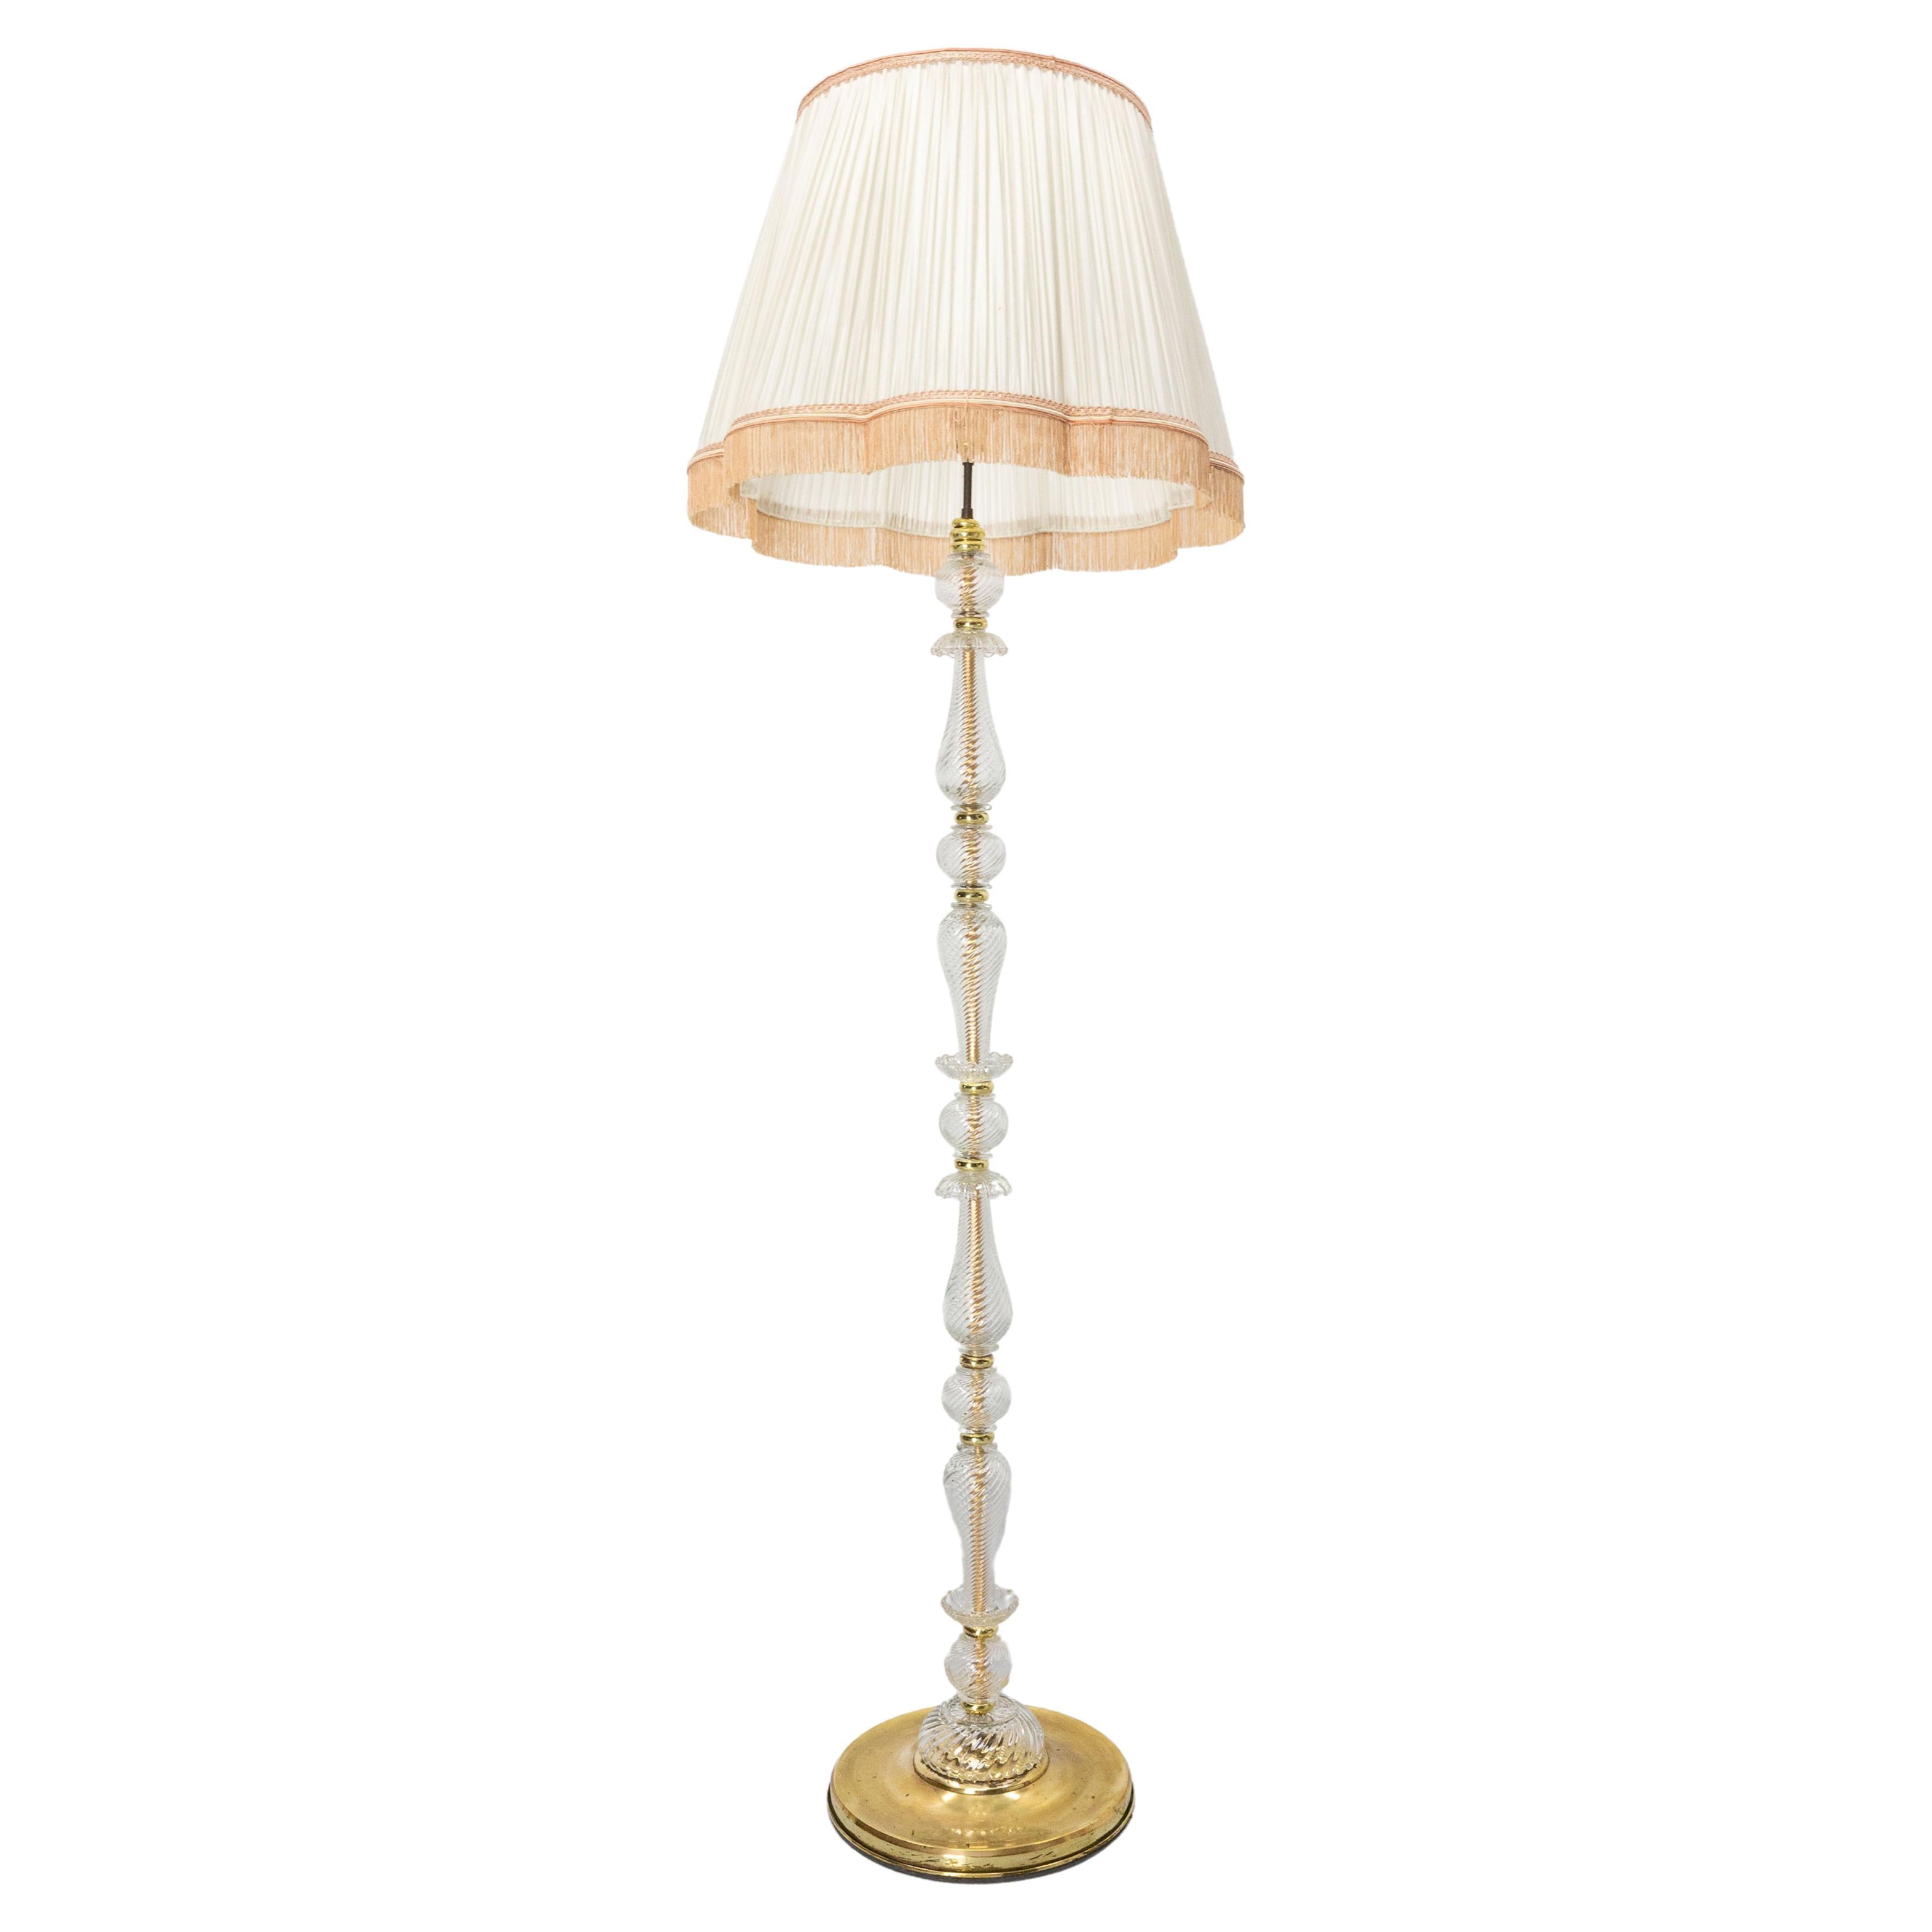 Glass & Brass Floor Lamp in the Murano Style Light Lantern, French, circa 1960 For Sale